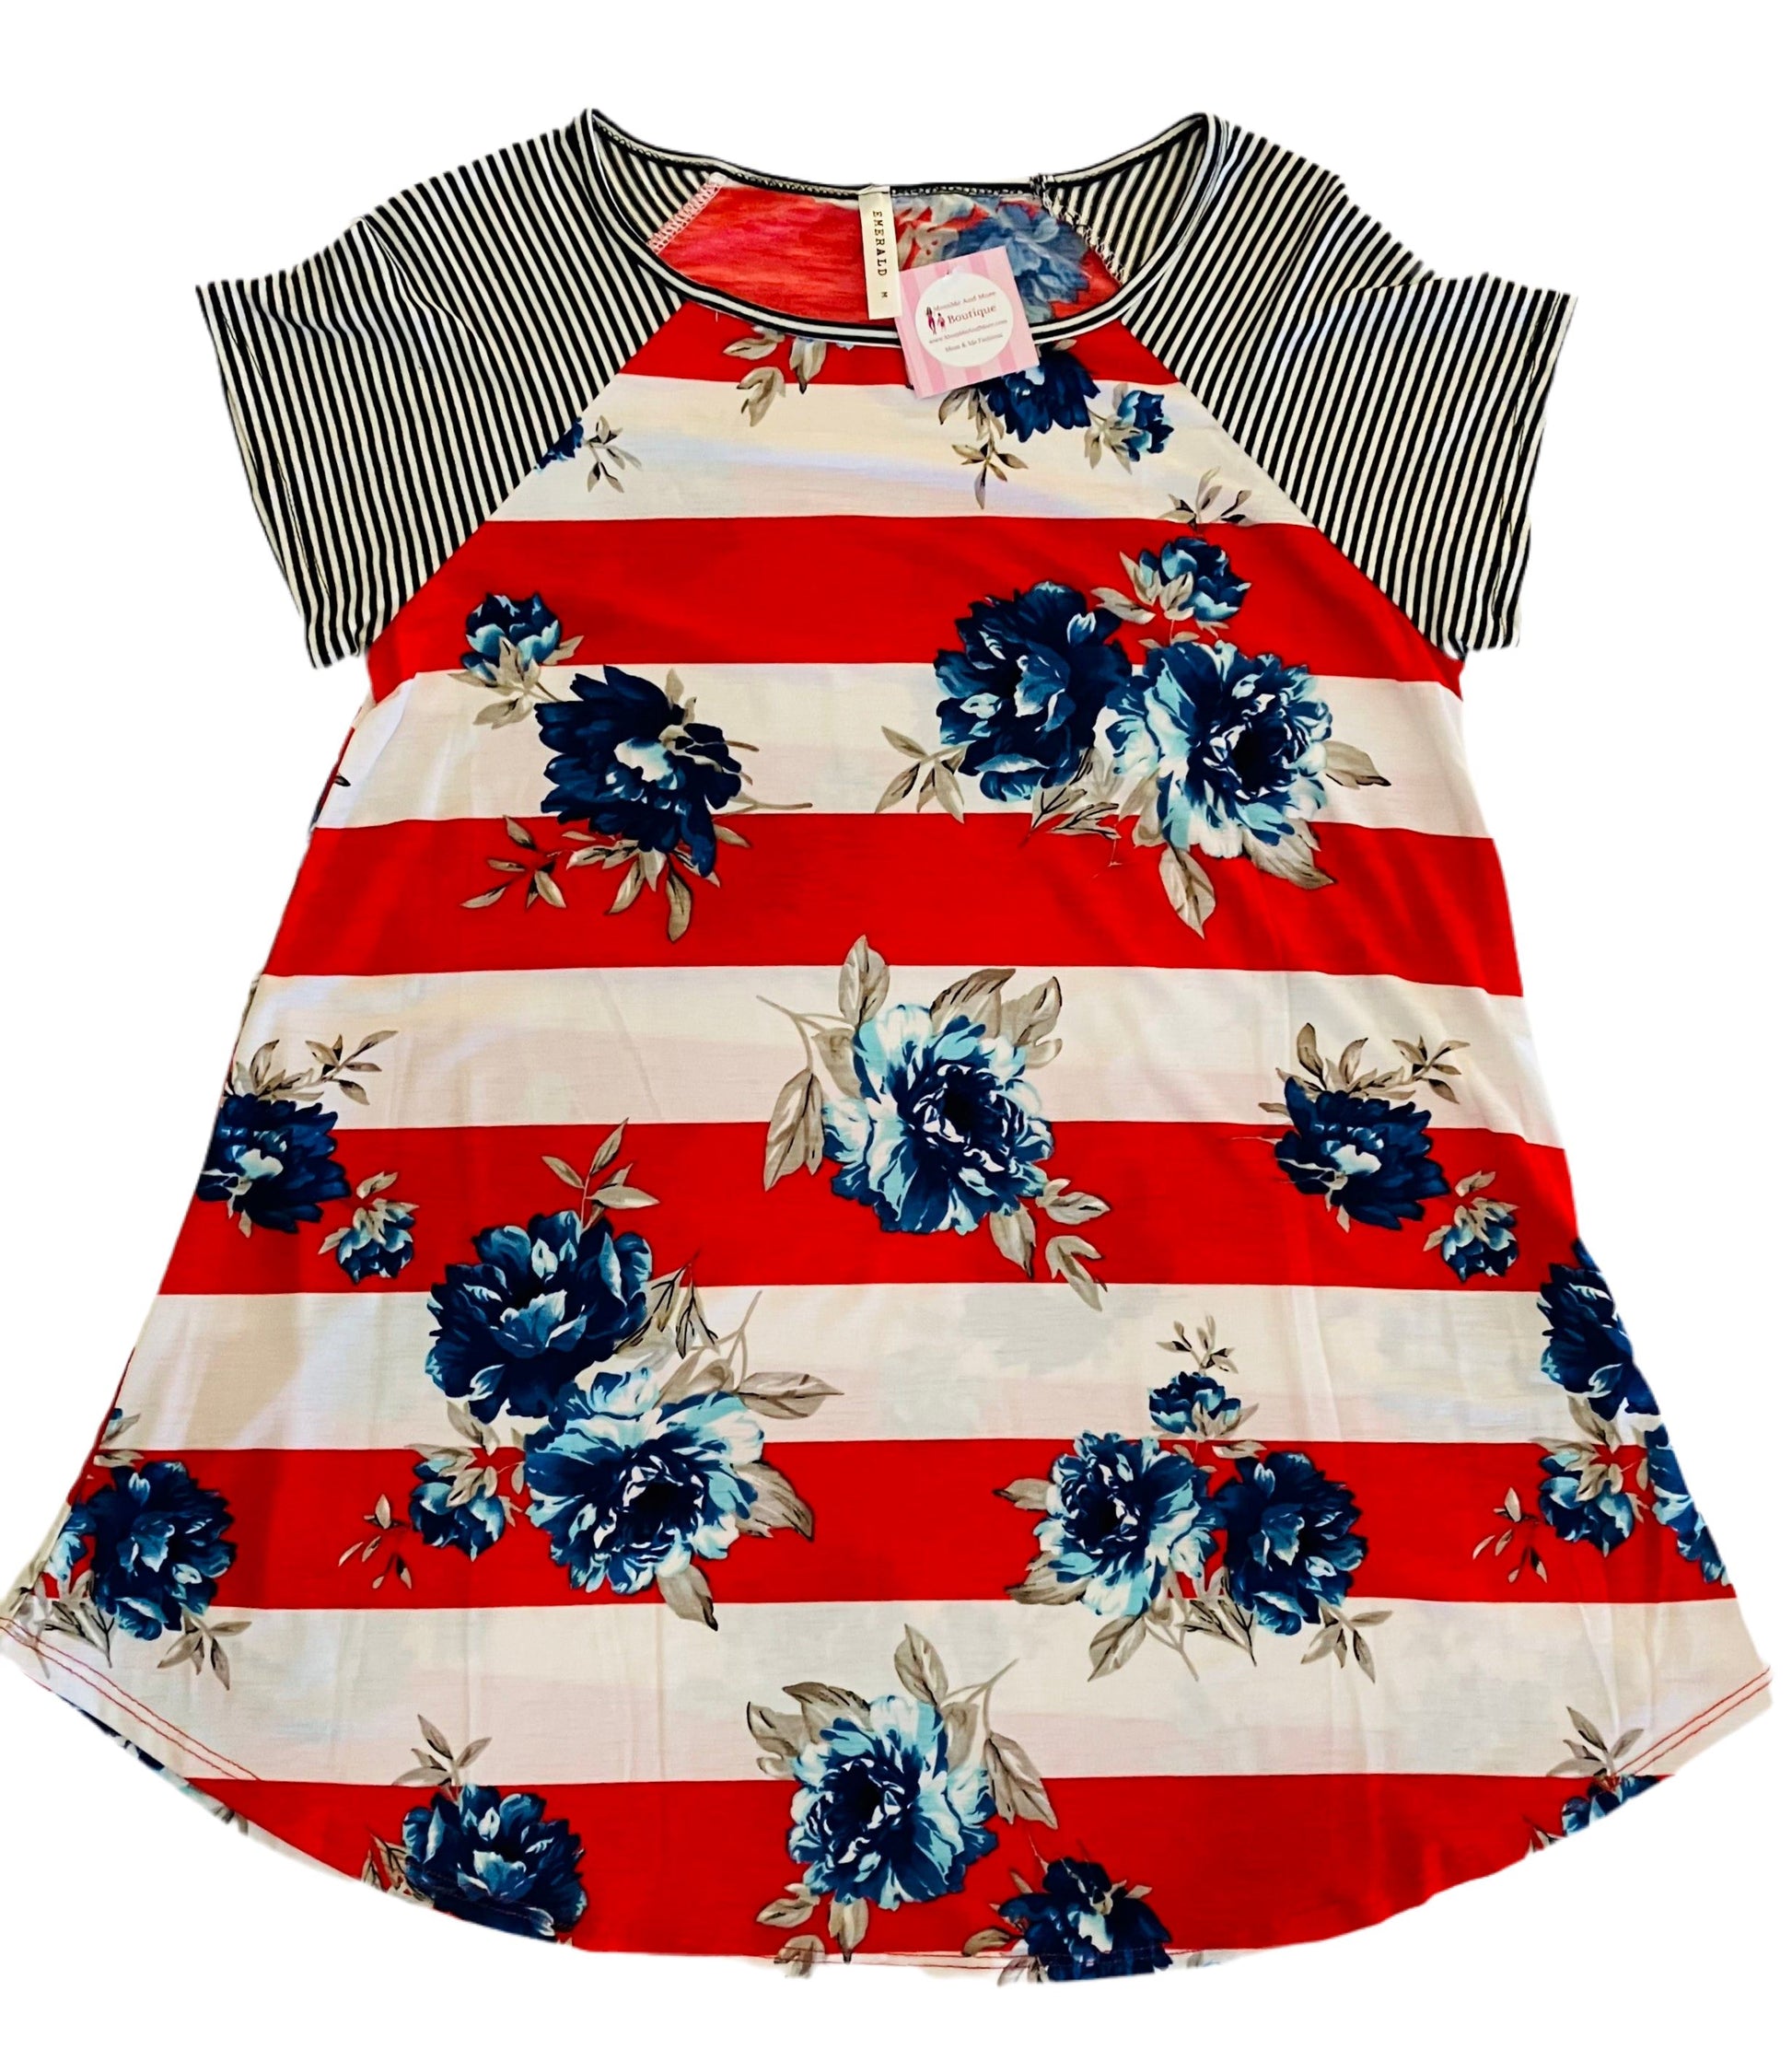 Womens Floral Striped Top, 4th of July Shirt, Sizes 1xl/2xl/3xl, Red/White/Blue Tops MomMe and More 